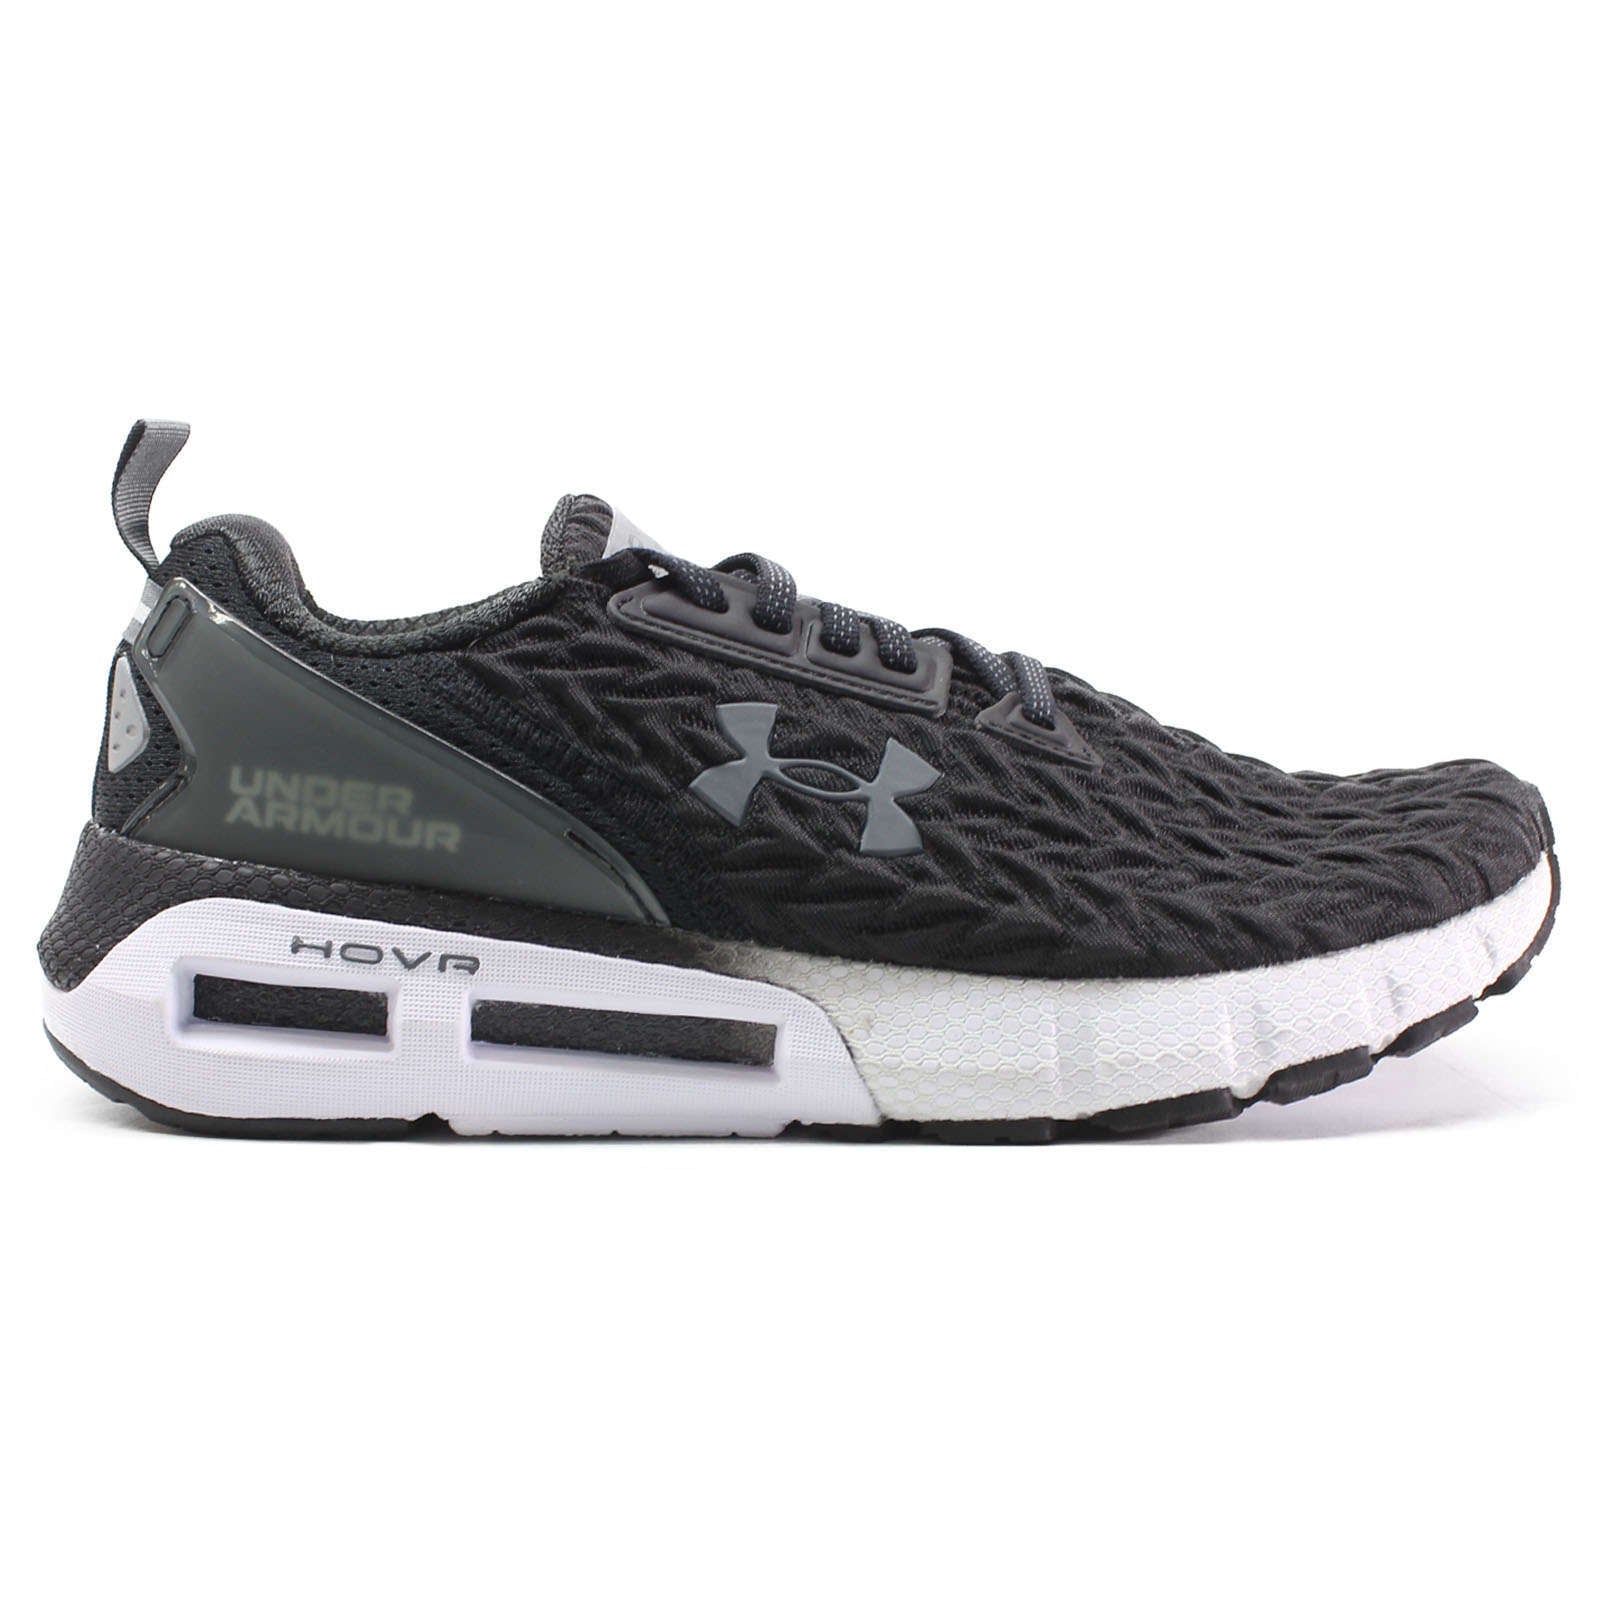 Under Armour HOVR Mega 2 Clone Synthetic Textile Men's Low-Top Trainers#color_black white